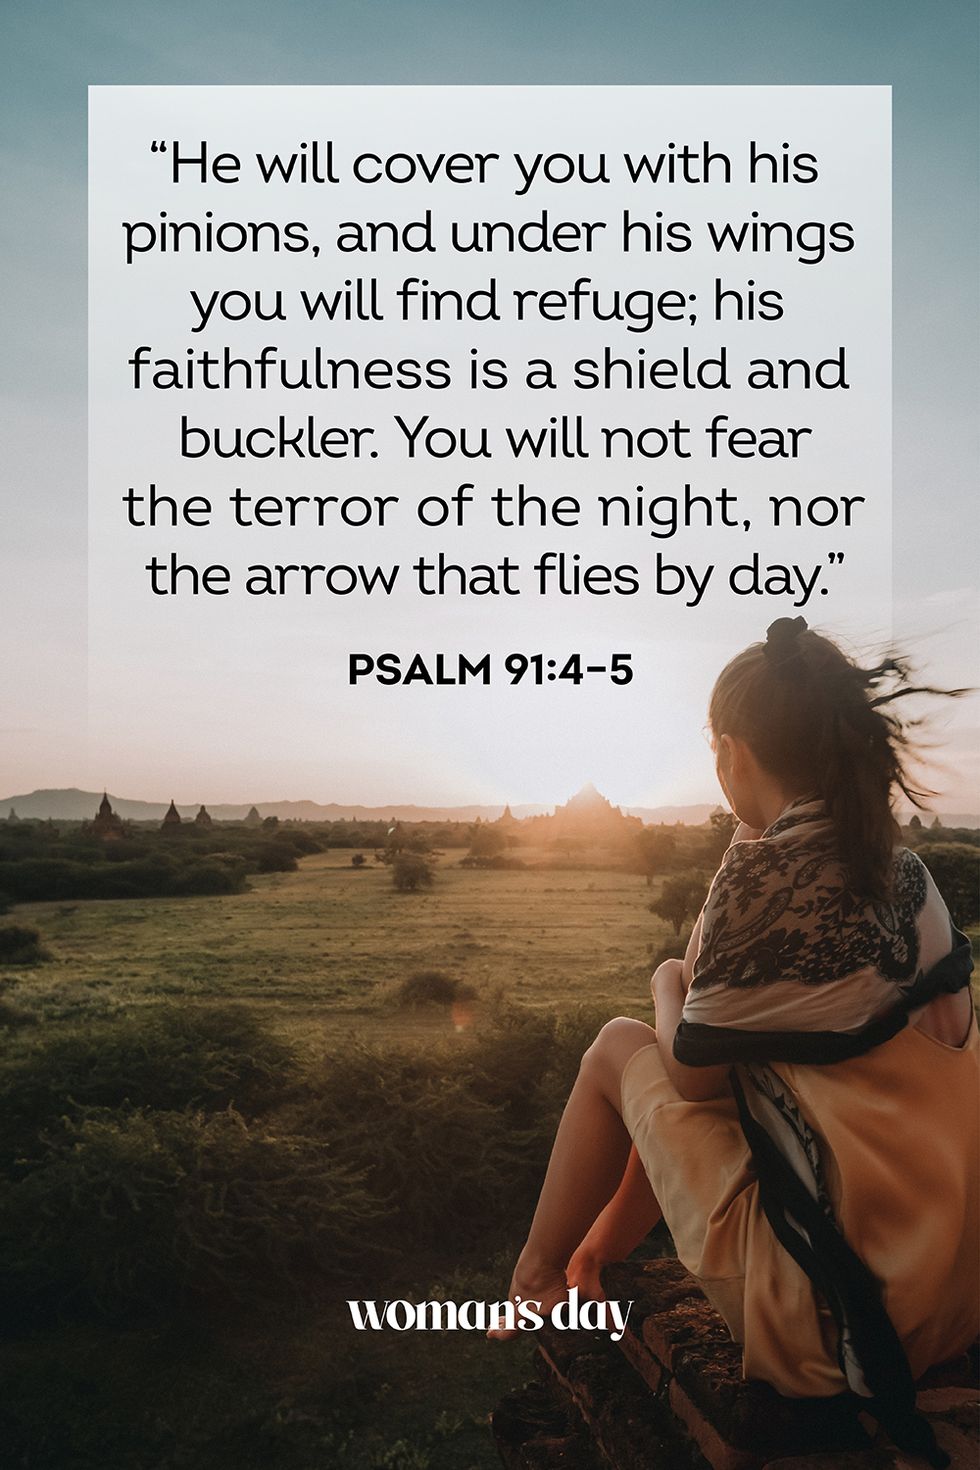 bible verses about fear psalm 91 4 5